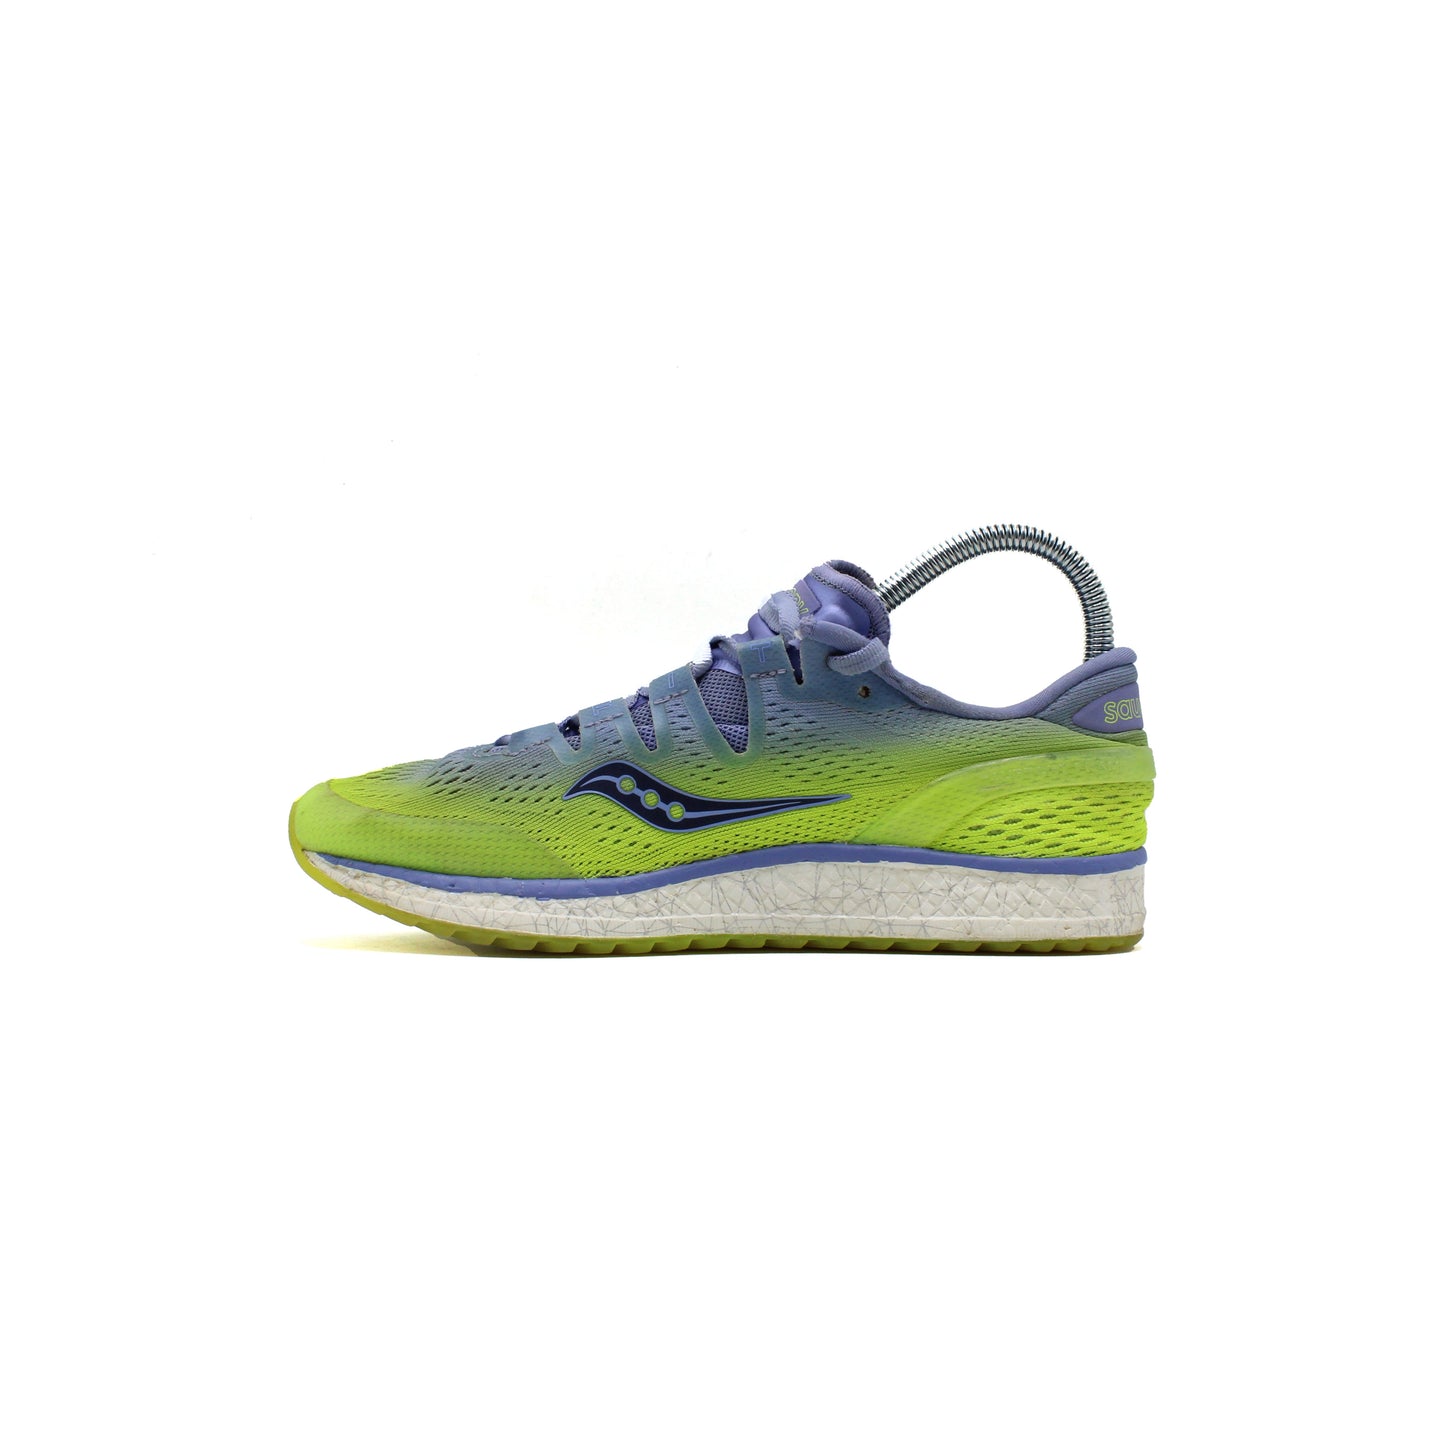 Saucony Women's Freedom ISO Running Shoes